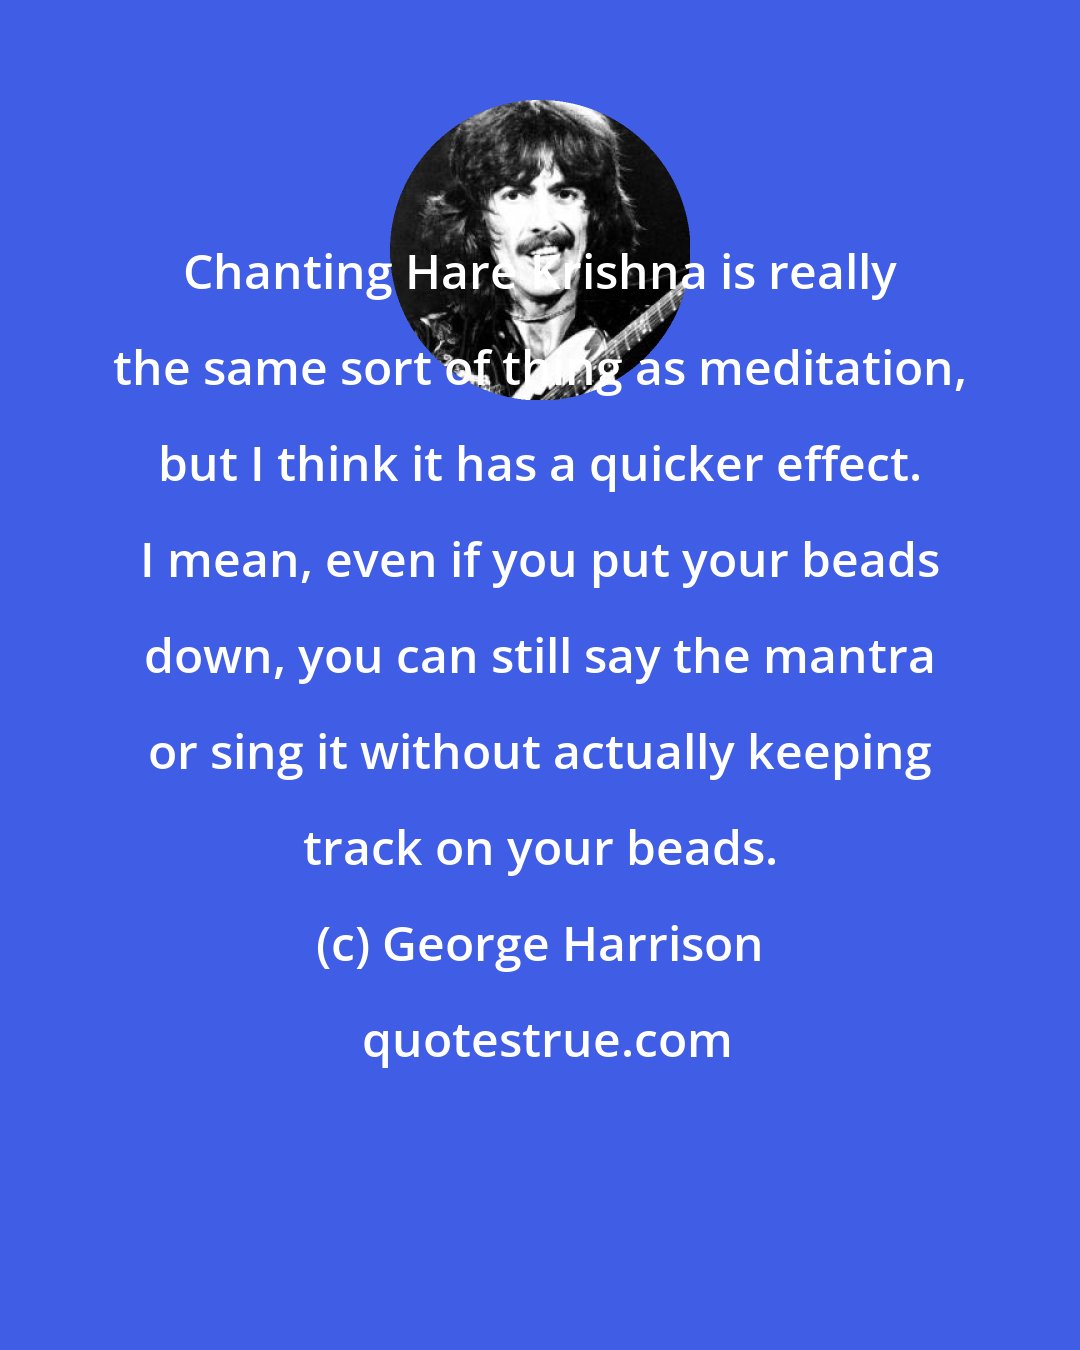 George Harrison: Chanting Hare Krishna is really the same sort of thing as meditation, but I think it has a quicker effect. I mean, even if you put your beads down, you can still say the mantra or sing it without actually keeping track on your beads.